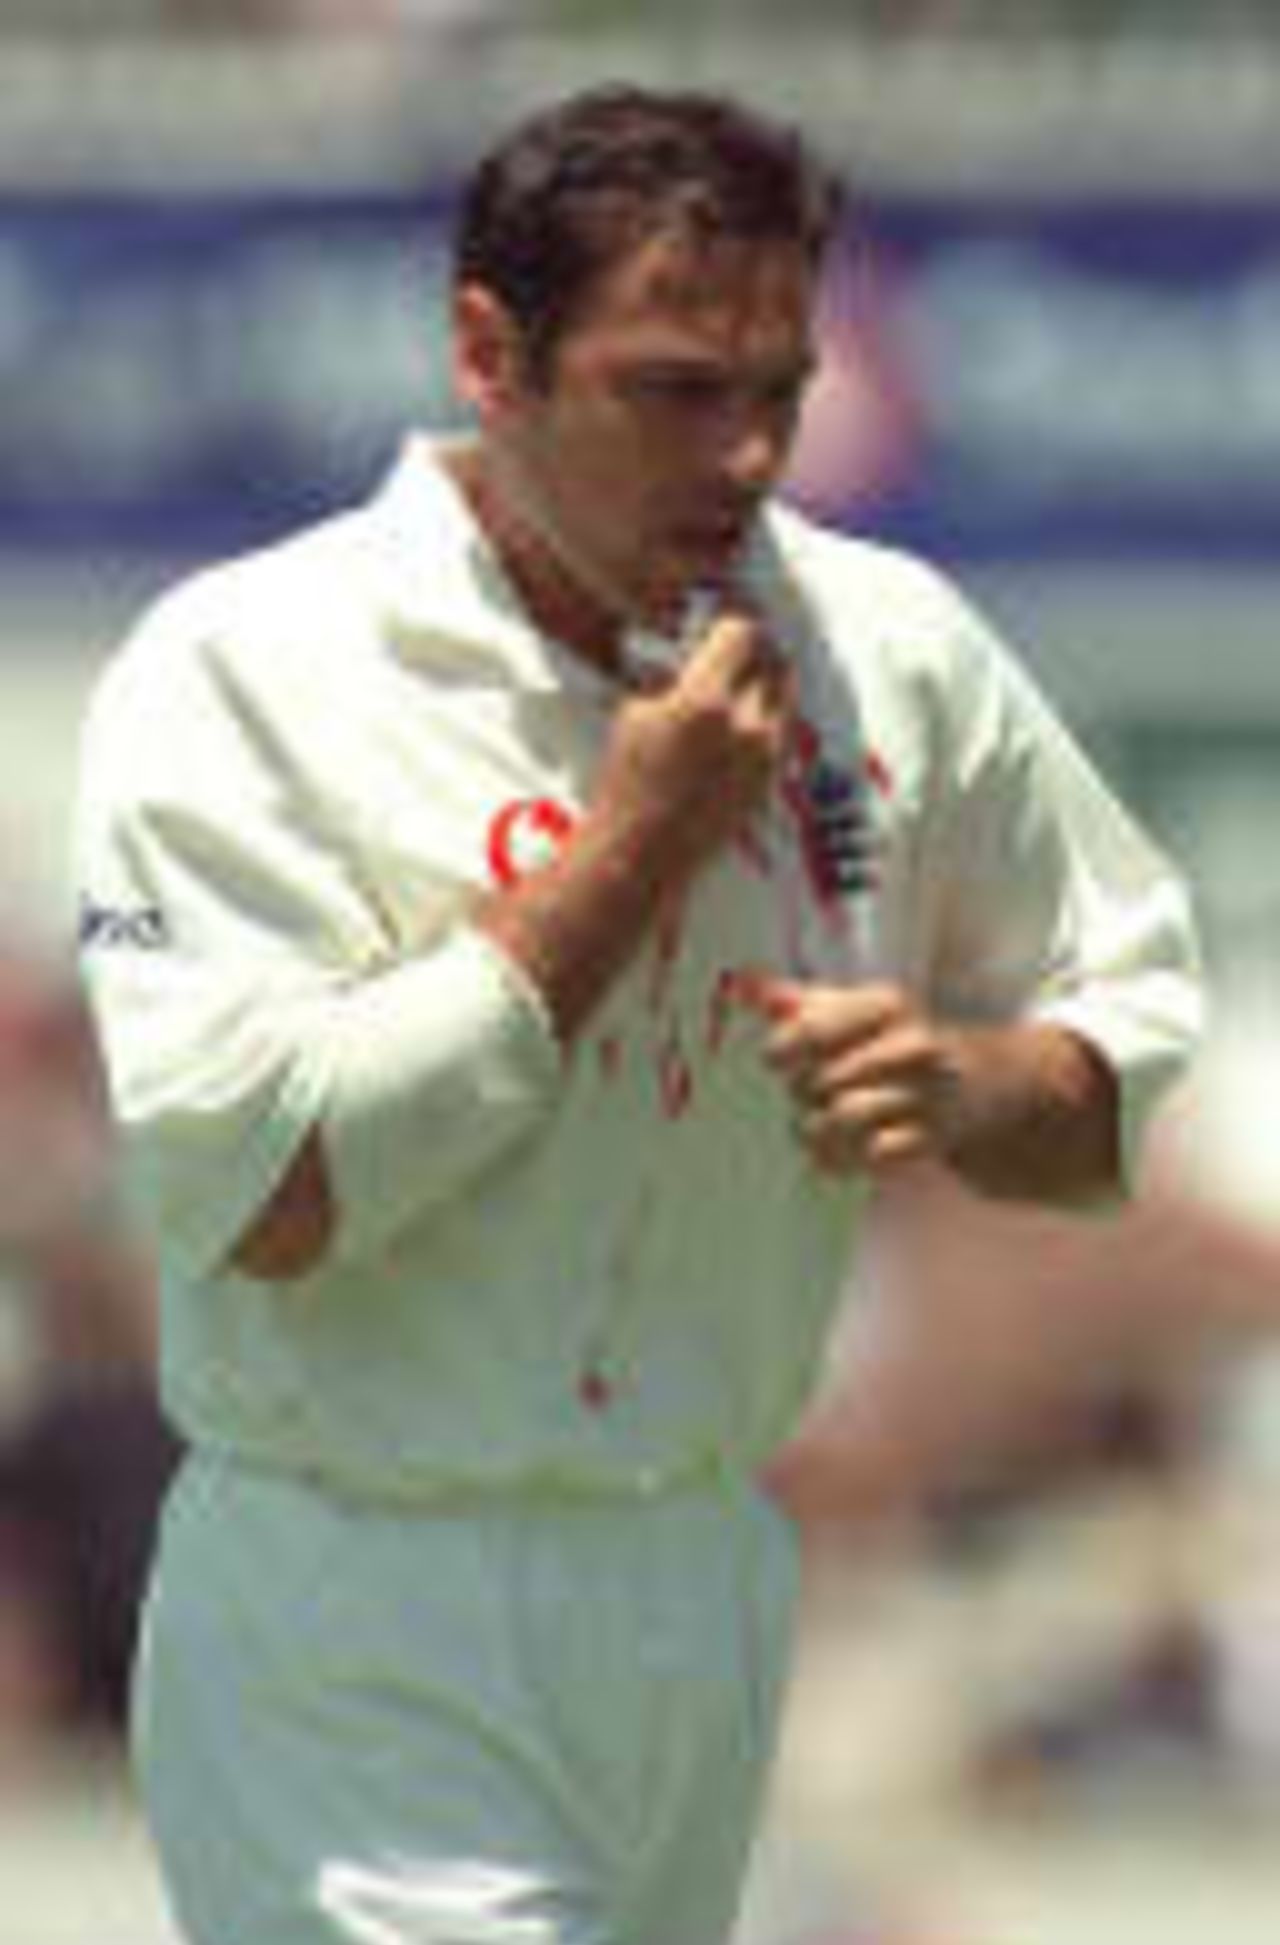 Ramprakash with blood on his shirt after being hit by a bouncer The Ashes, 1998/99, 2nd Test Australia v England WACA Ground, Perth 28 November